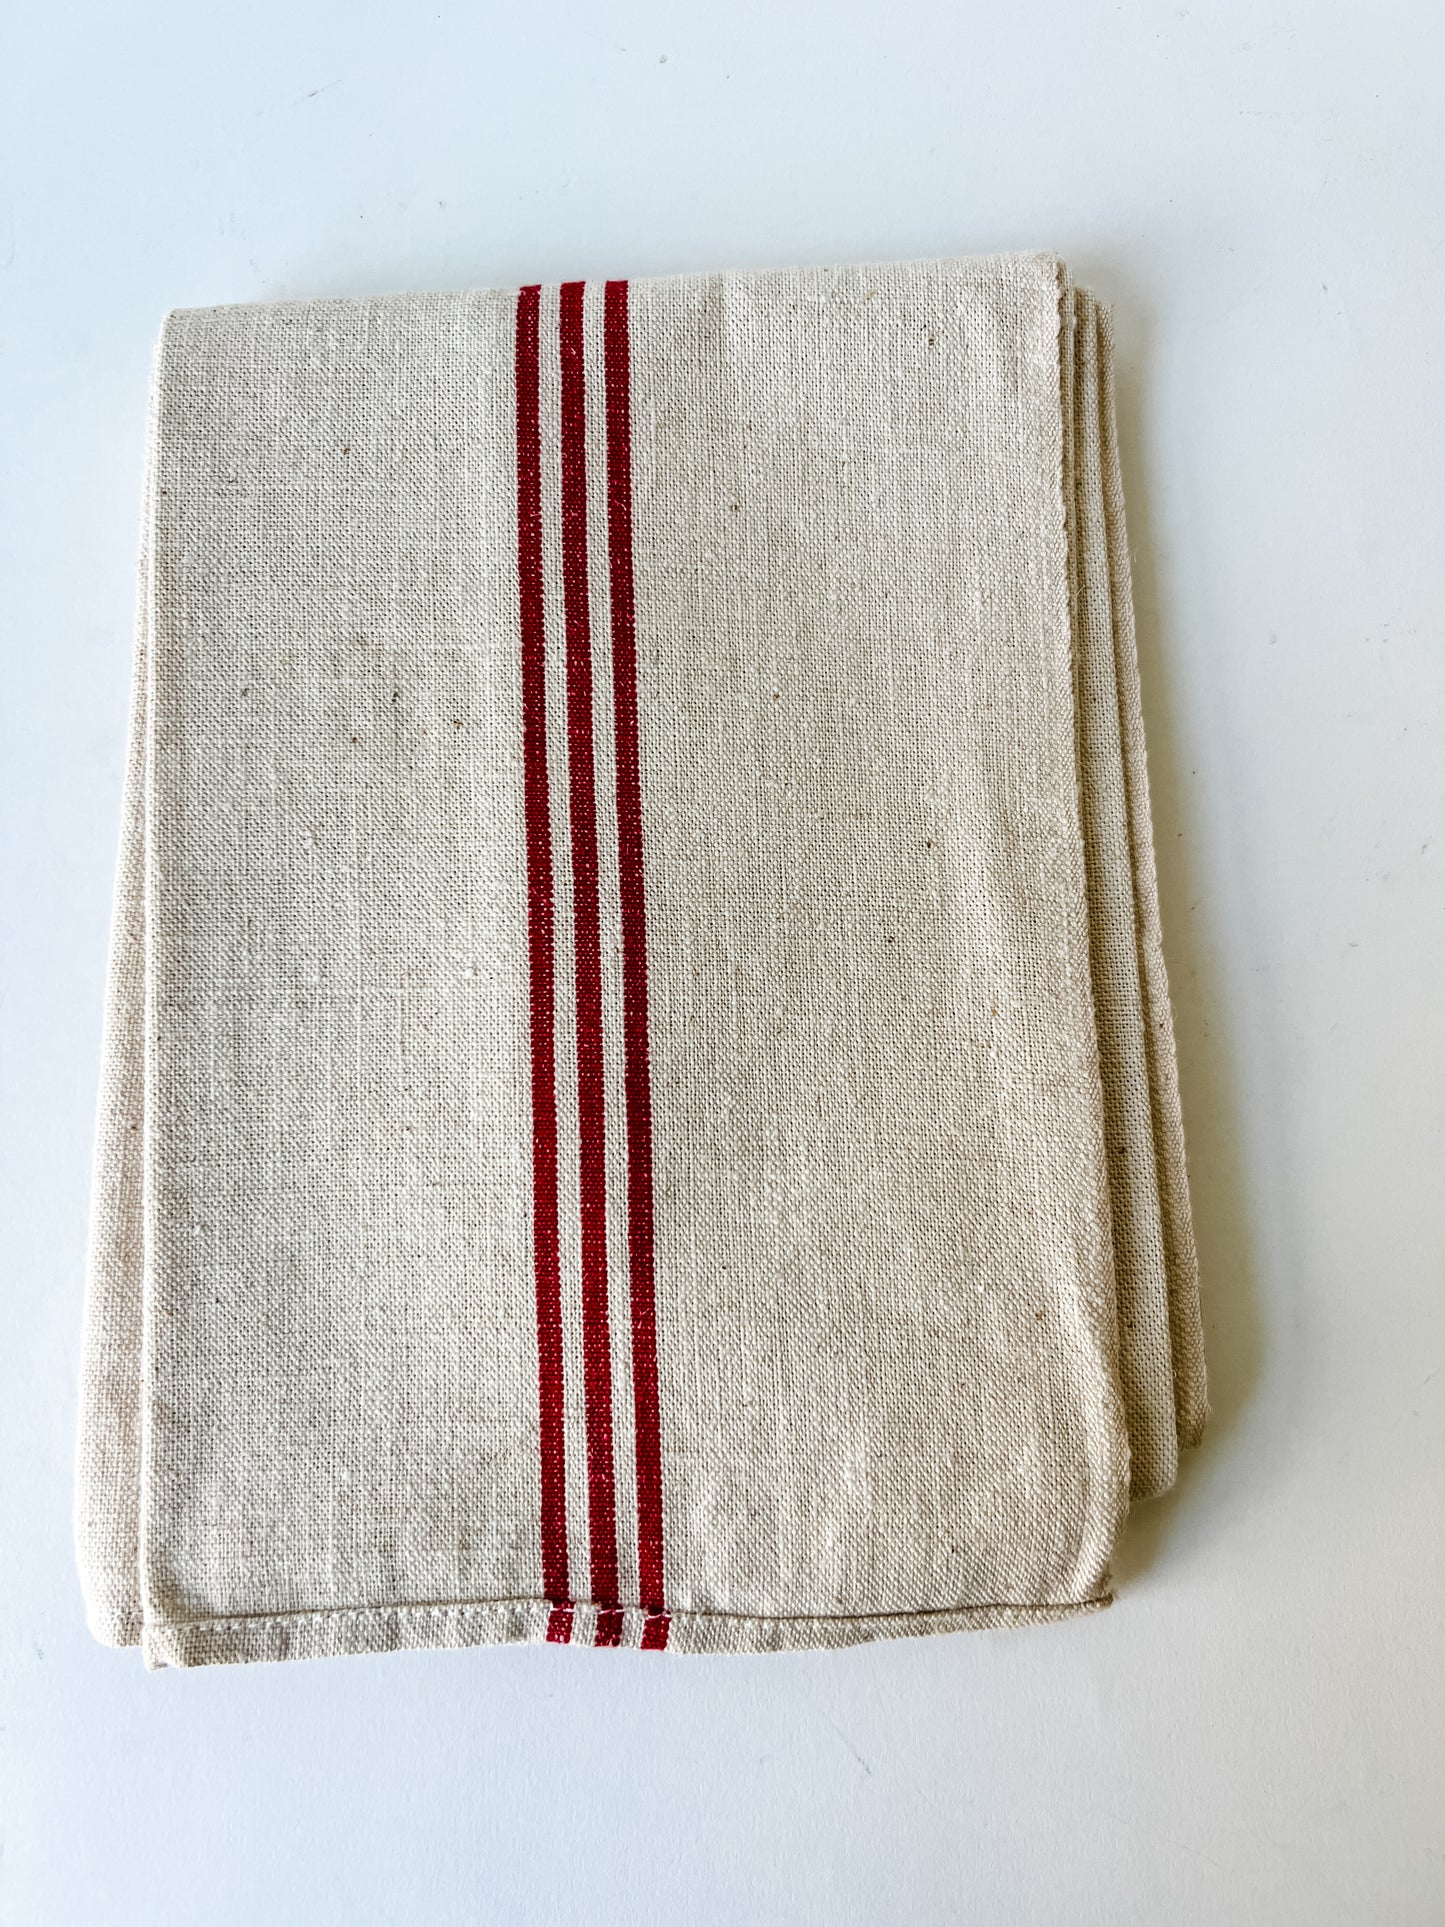 Vintage French Tea Towel (extra-large with 3 red stripes)